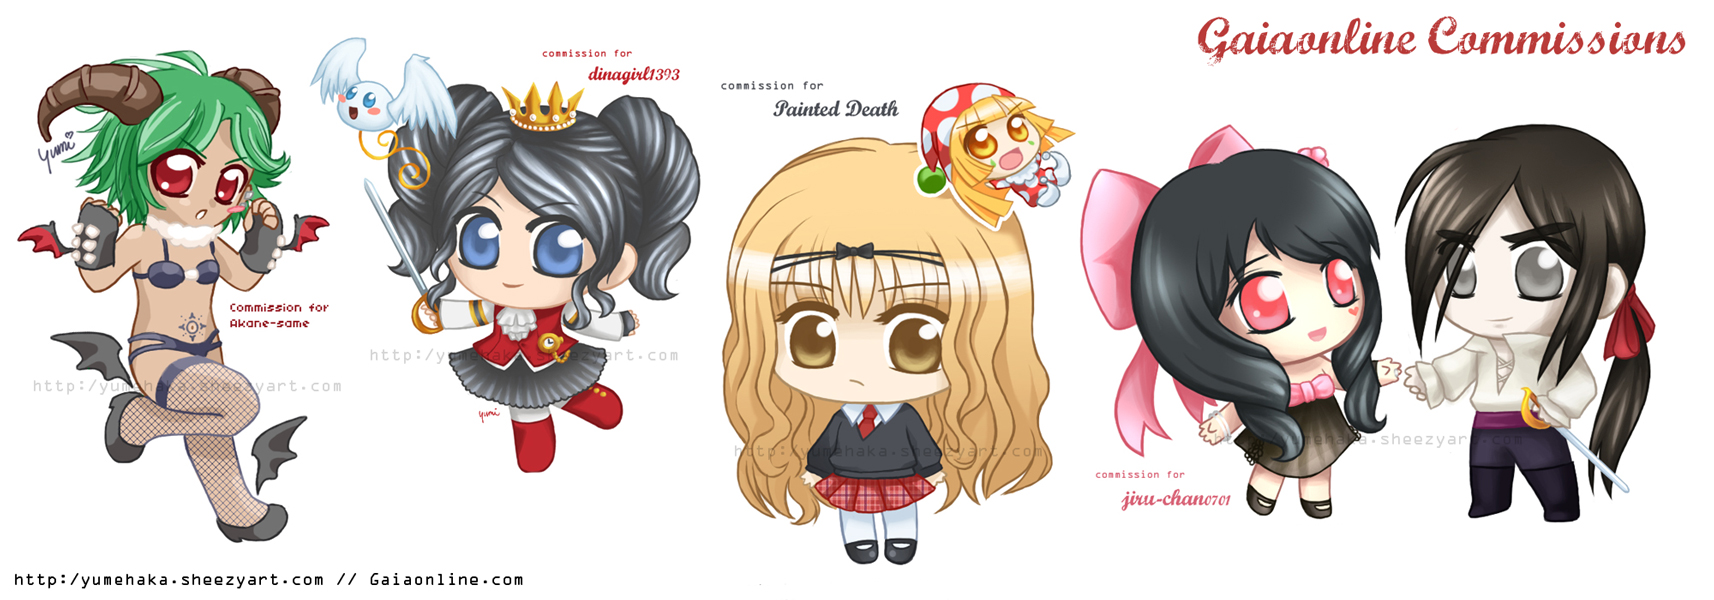 Gaia chibi commissions by ellanor_angel_of_anime